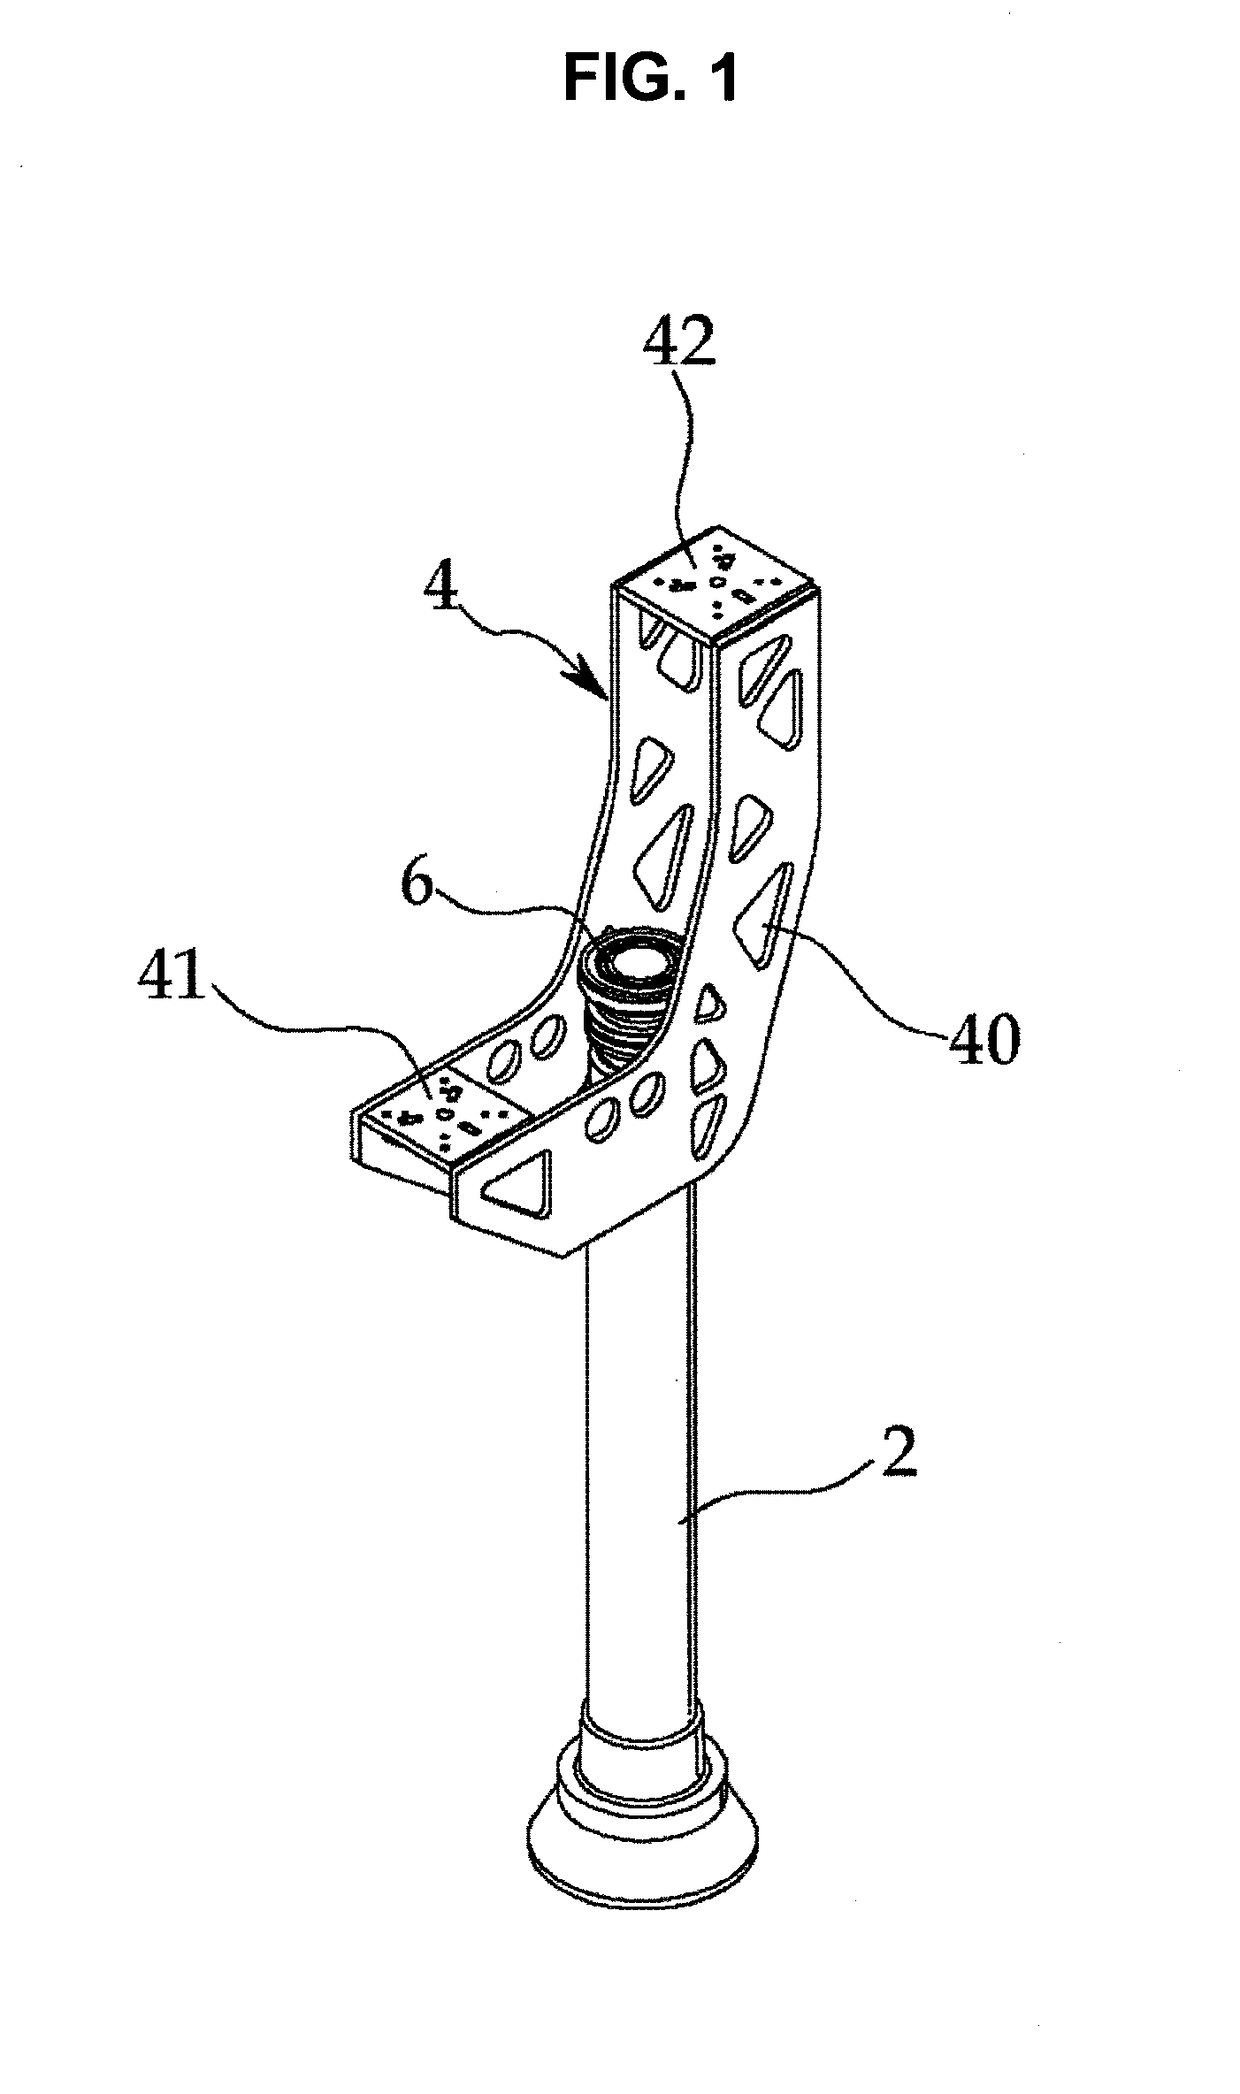 Vehicle mounting device for surveillance equipment